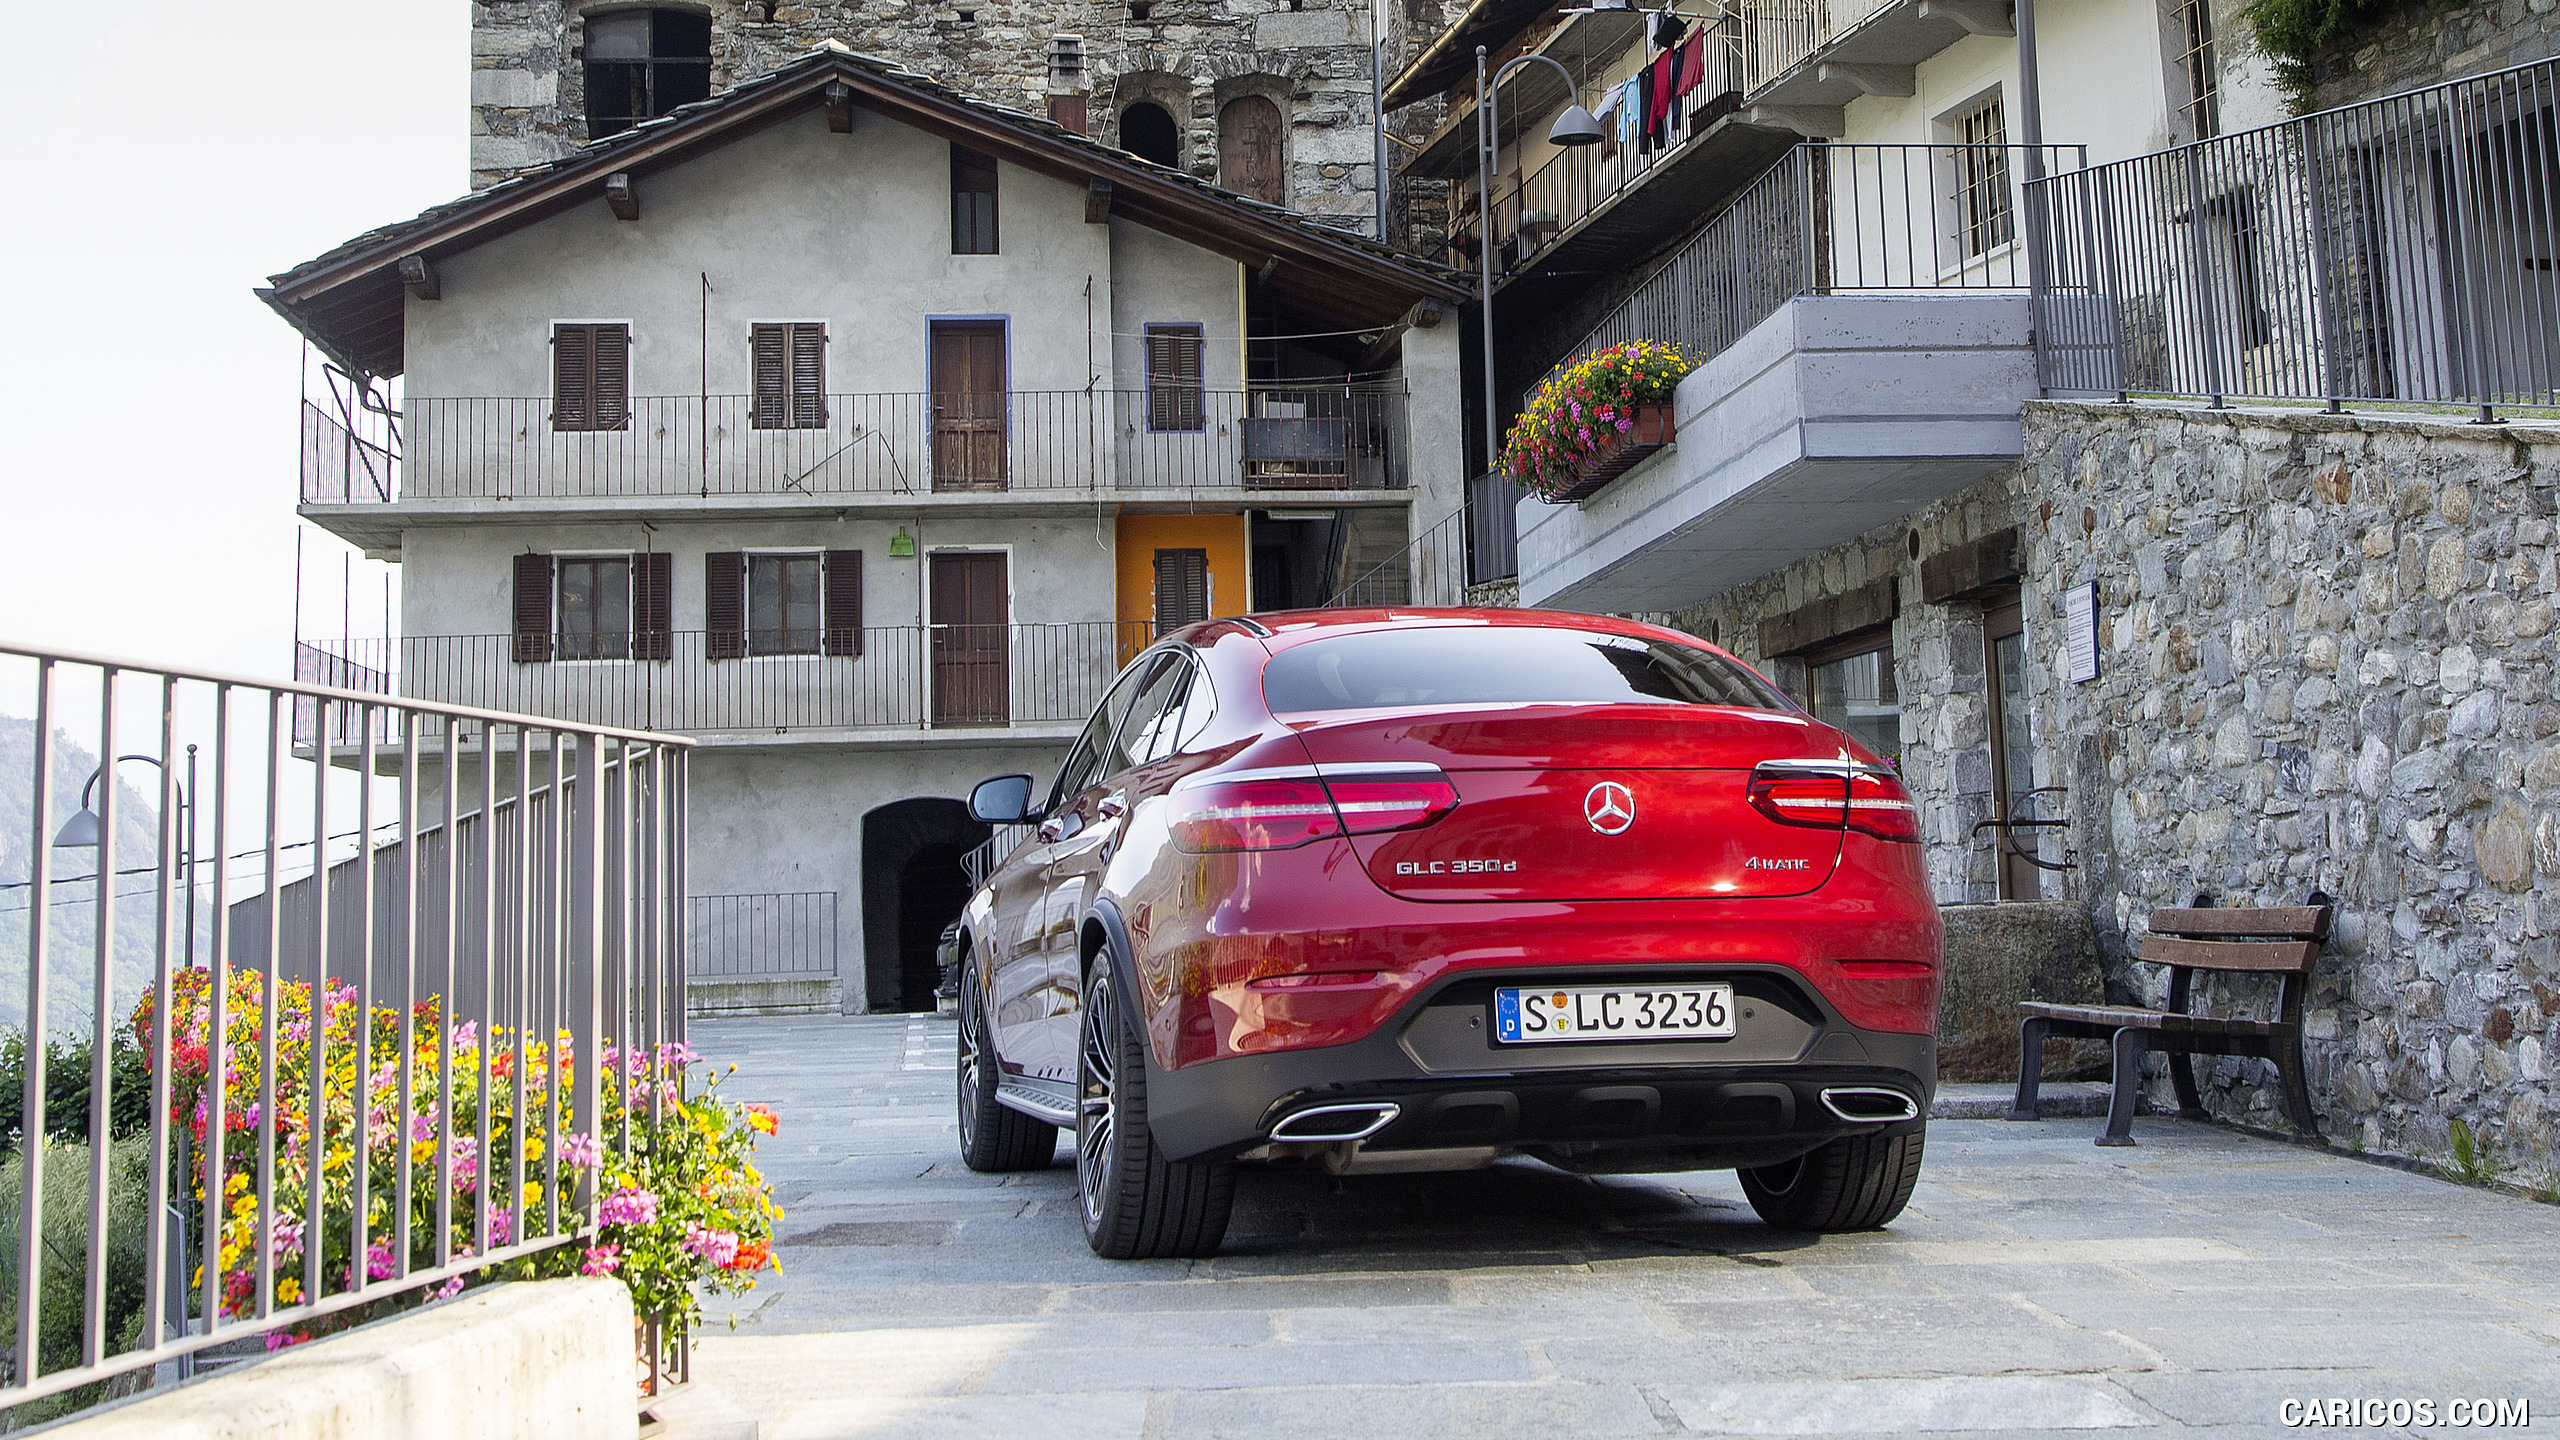 2017 Mercedes-Benz GLC 350 d Coupe (Diesel; Color: Hyacinth Red) - Rear, #77 of 144